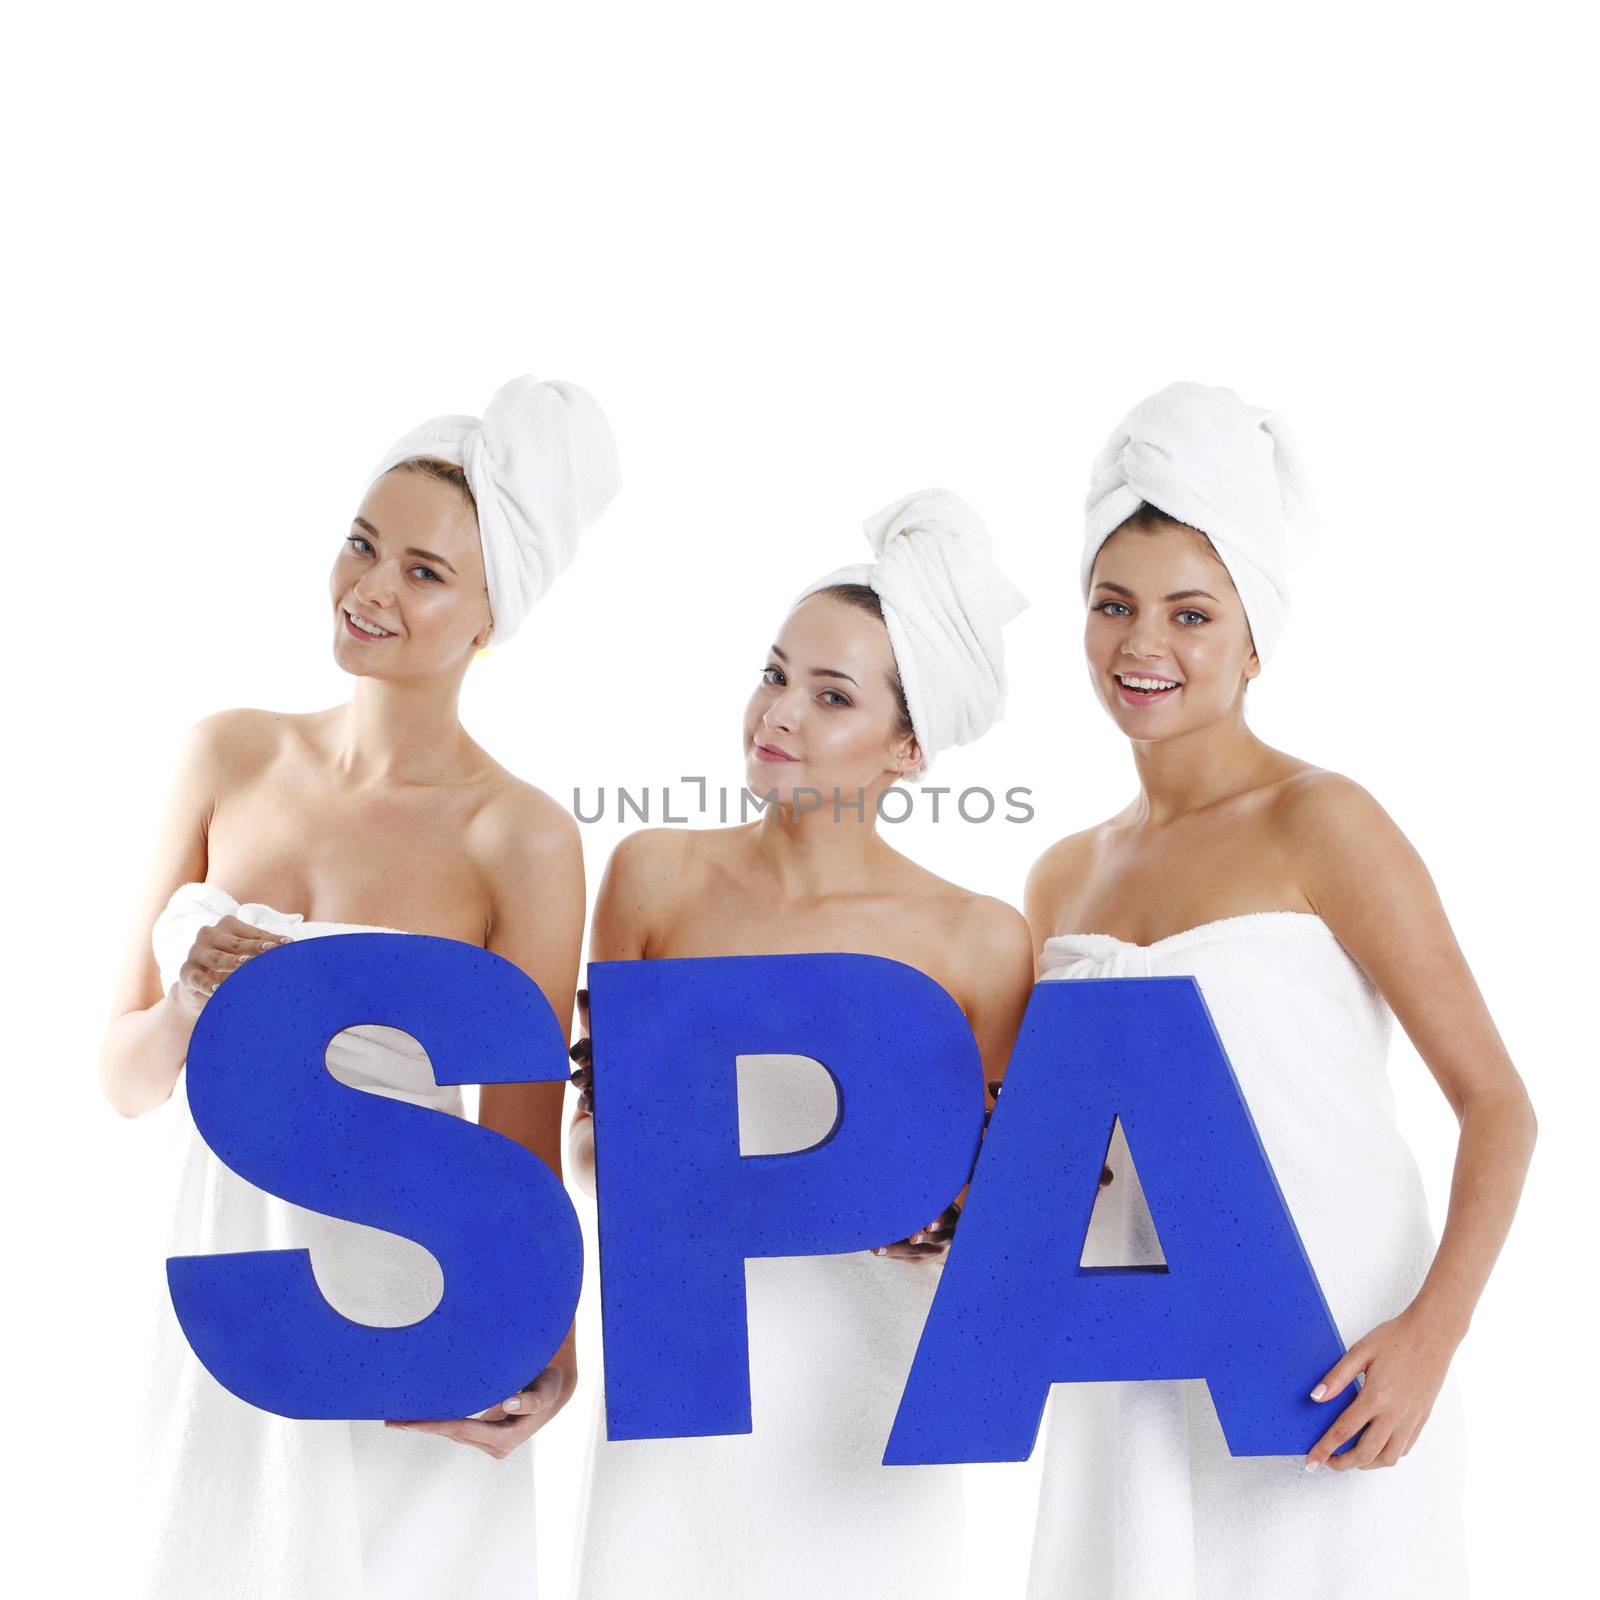 Beautiful young women holding big blue spa letters isolated on white background